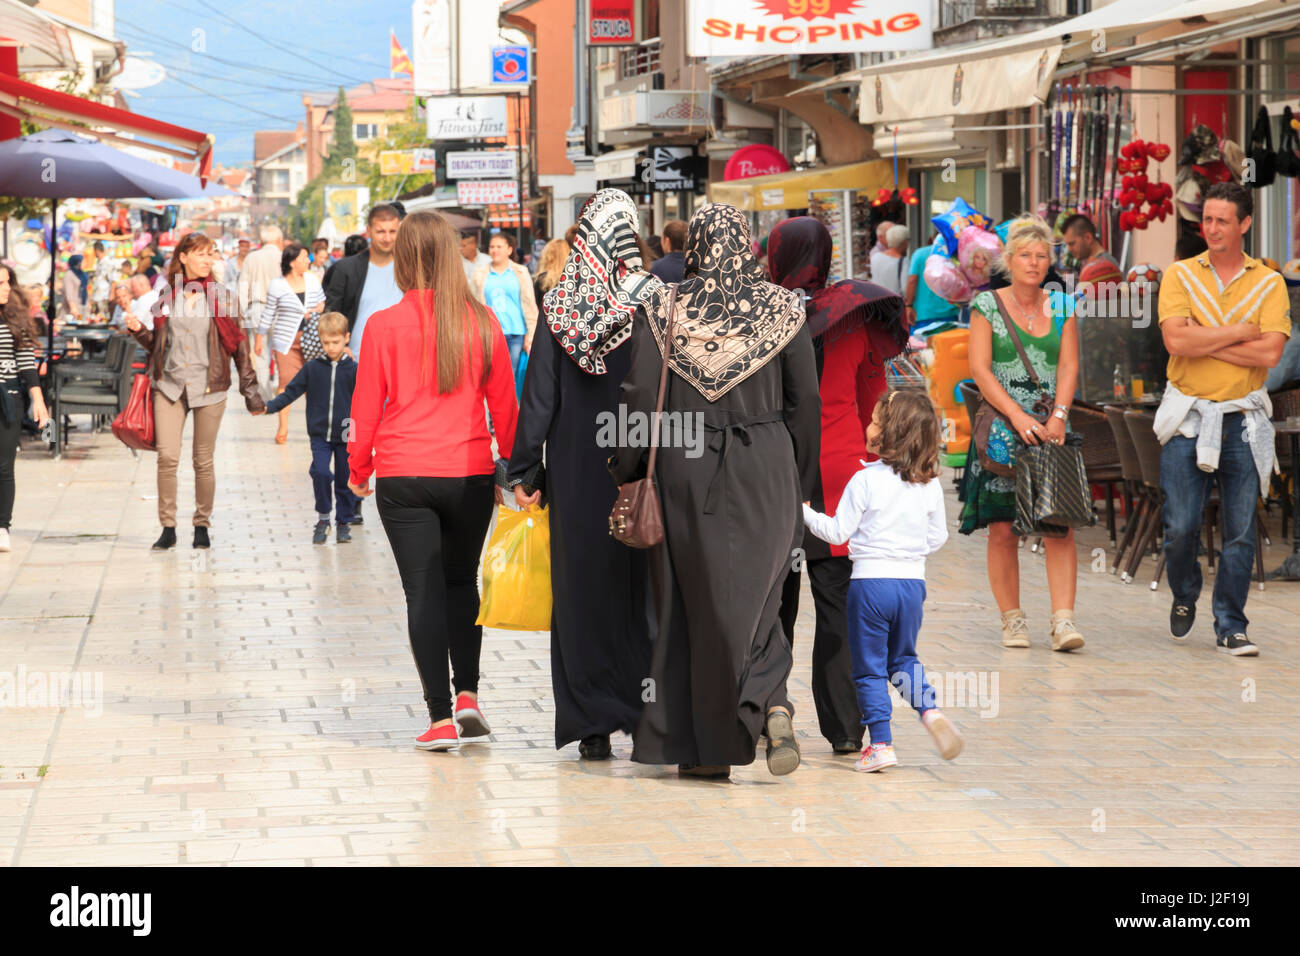 Macedonia, Lake Ohrid, Struga situated in the Southwest region. The town of Struga is the seat of Struga Municipality. Shoppers along pedestrian street. (Editorial Use Only) Stock Photo